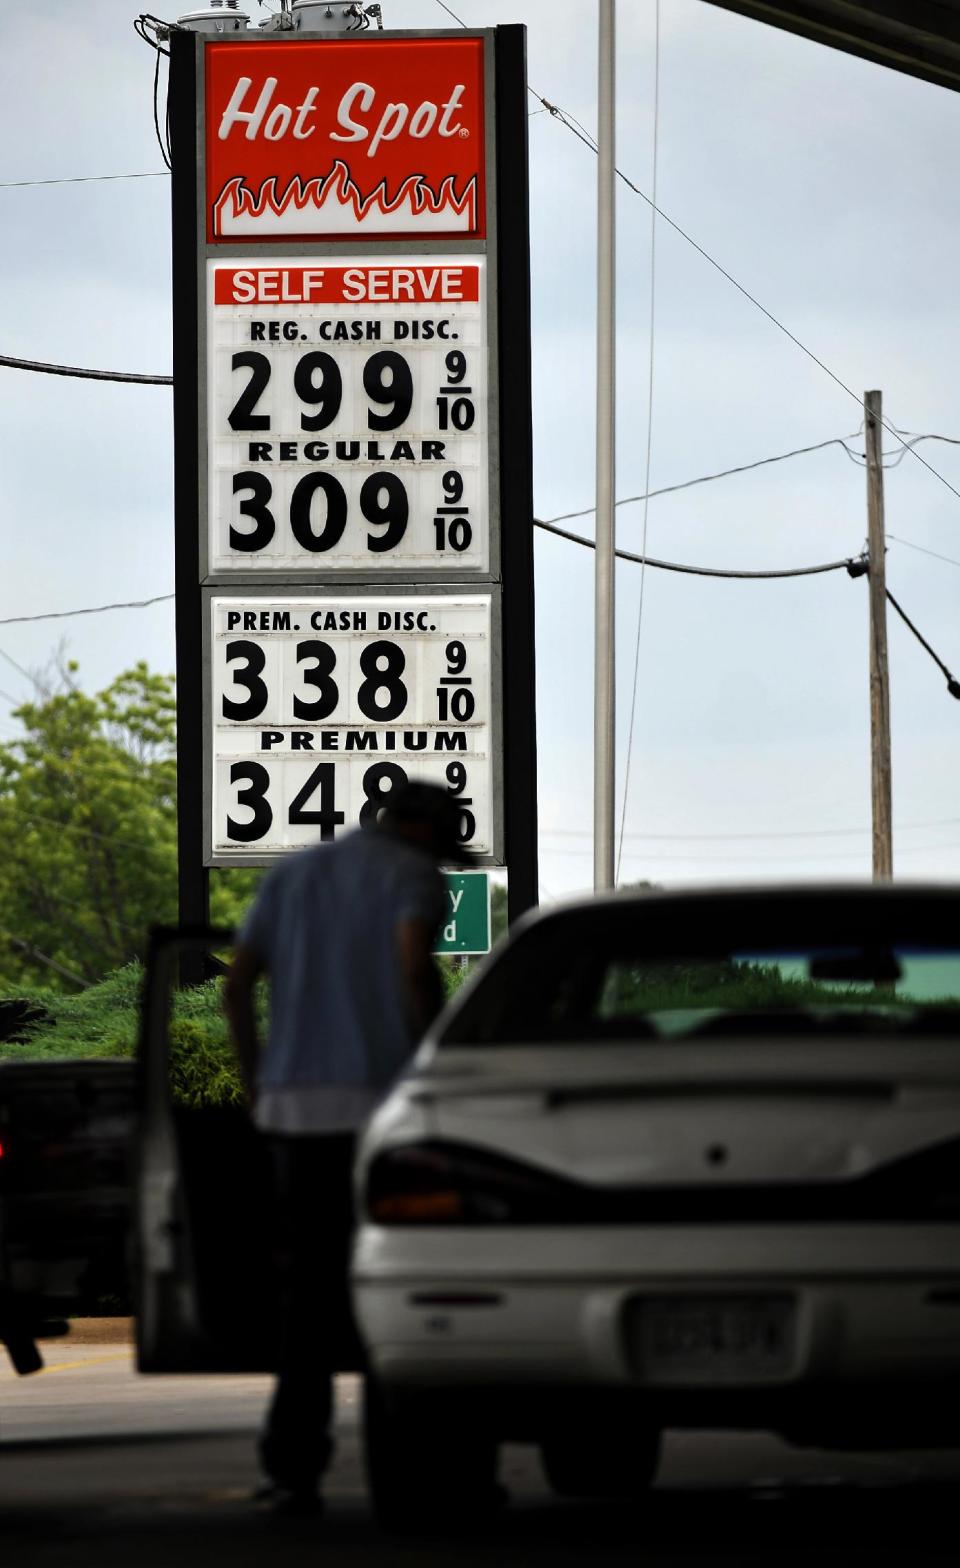 A motorist gets gas at a Hot Spot convenience store on East Main St. where the price is $2.99 a gallon, Friday, June 1, 2012 in Spartanburg, S.C. Oil prices plunged Friday as bleak reports on U.S. job growth and manufacturing heightened worries about a slowing global economy. (AP Photo/Rainier Ehrhardt)